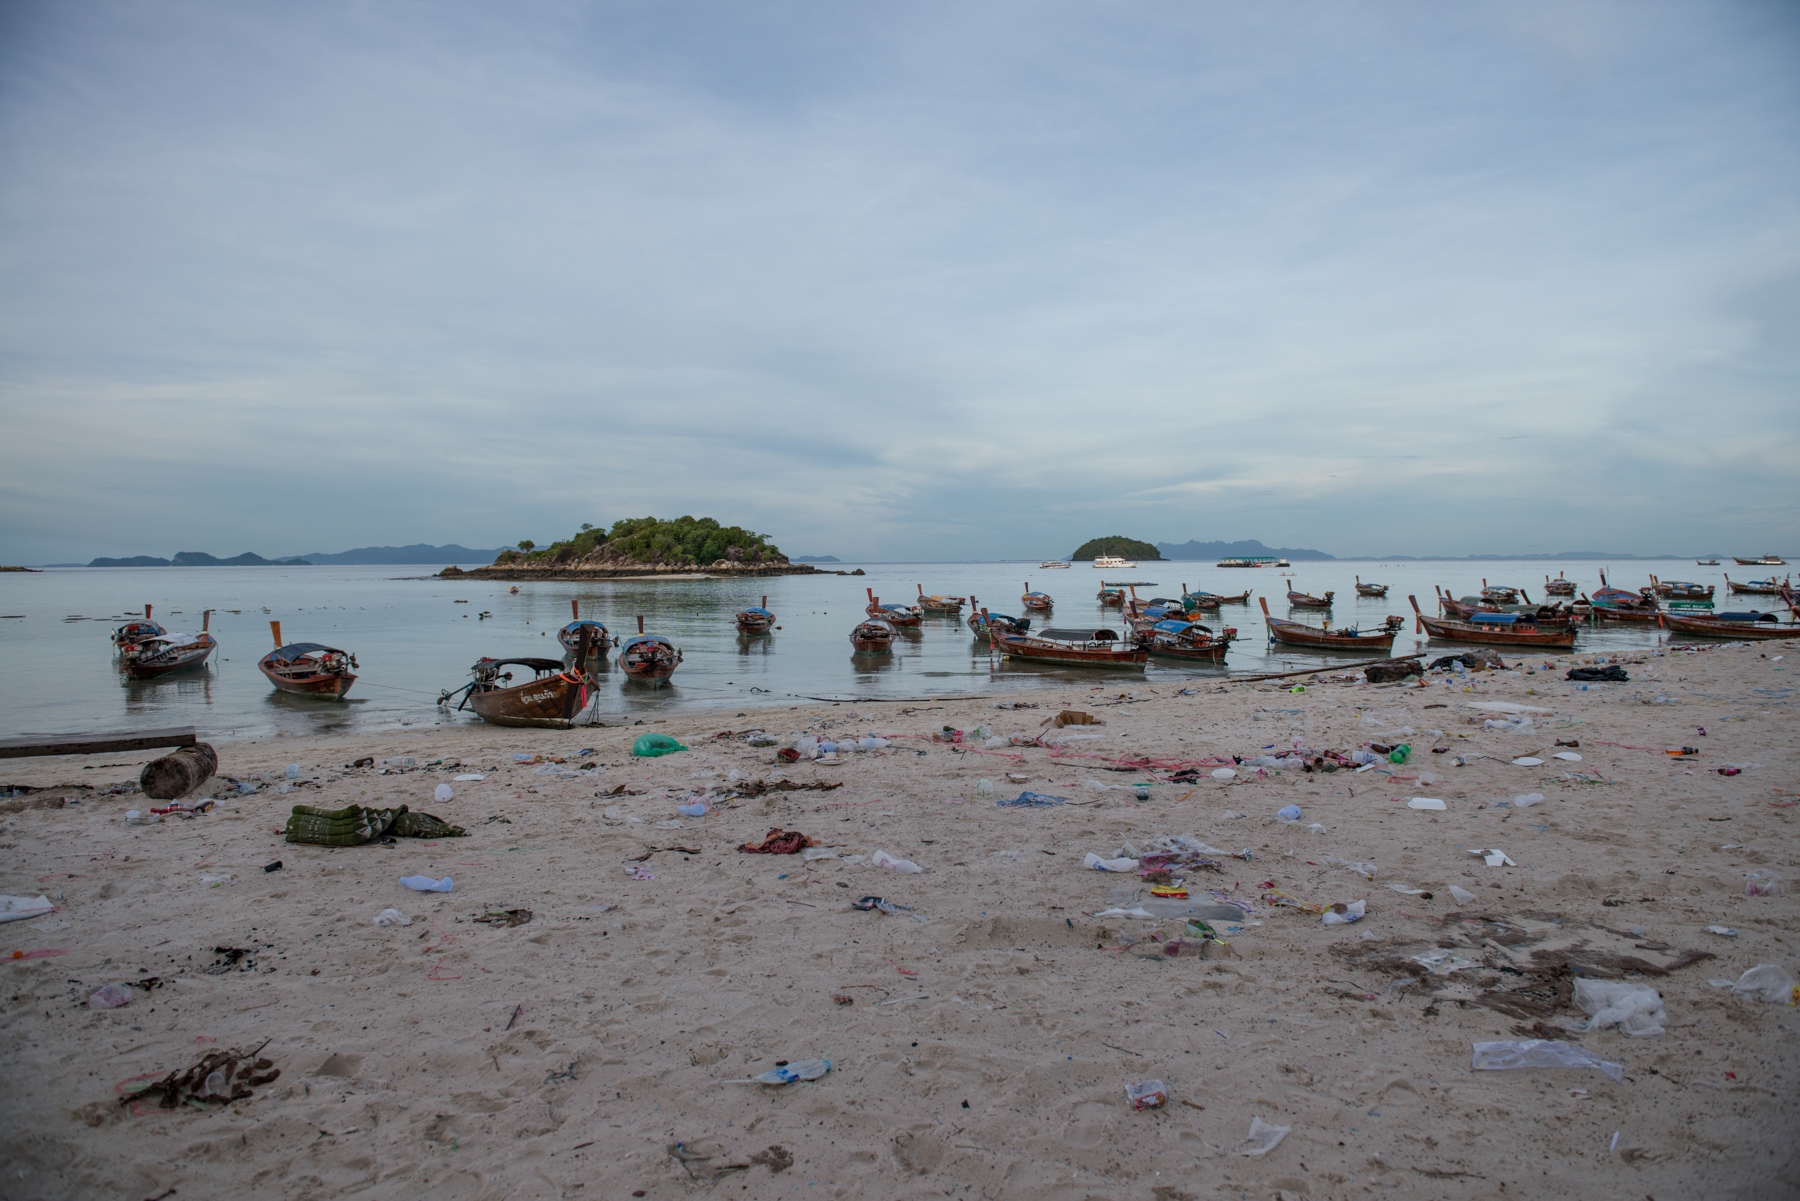 Lipe Island - After the party, trash lies strewn along the shore....